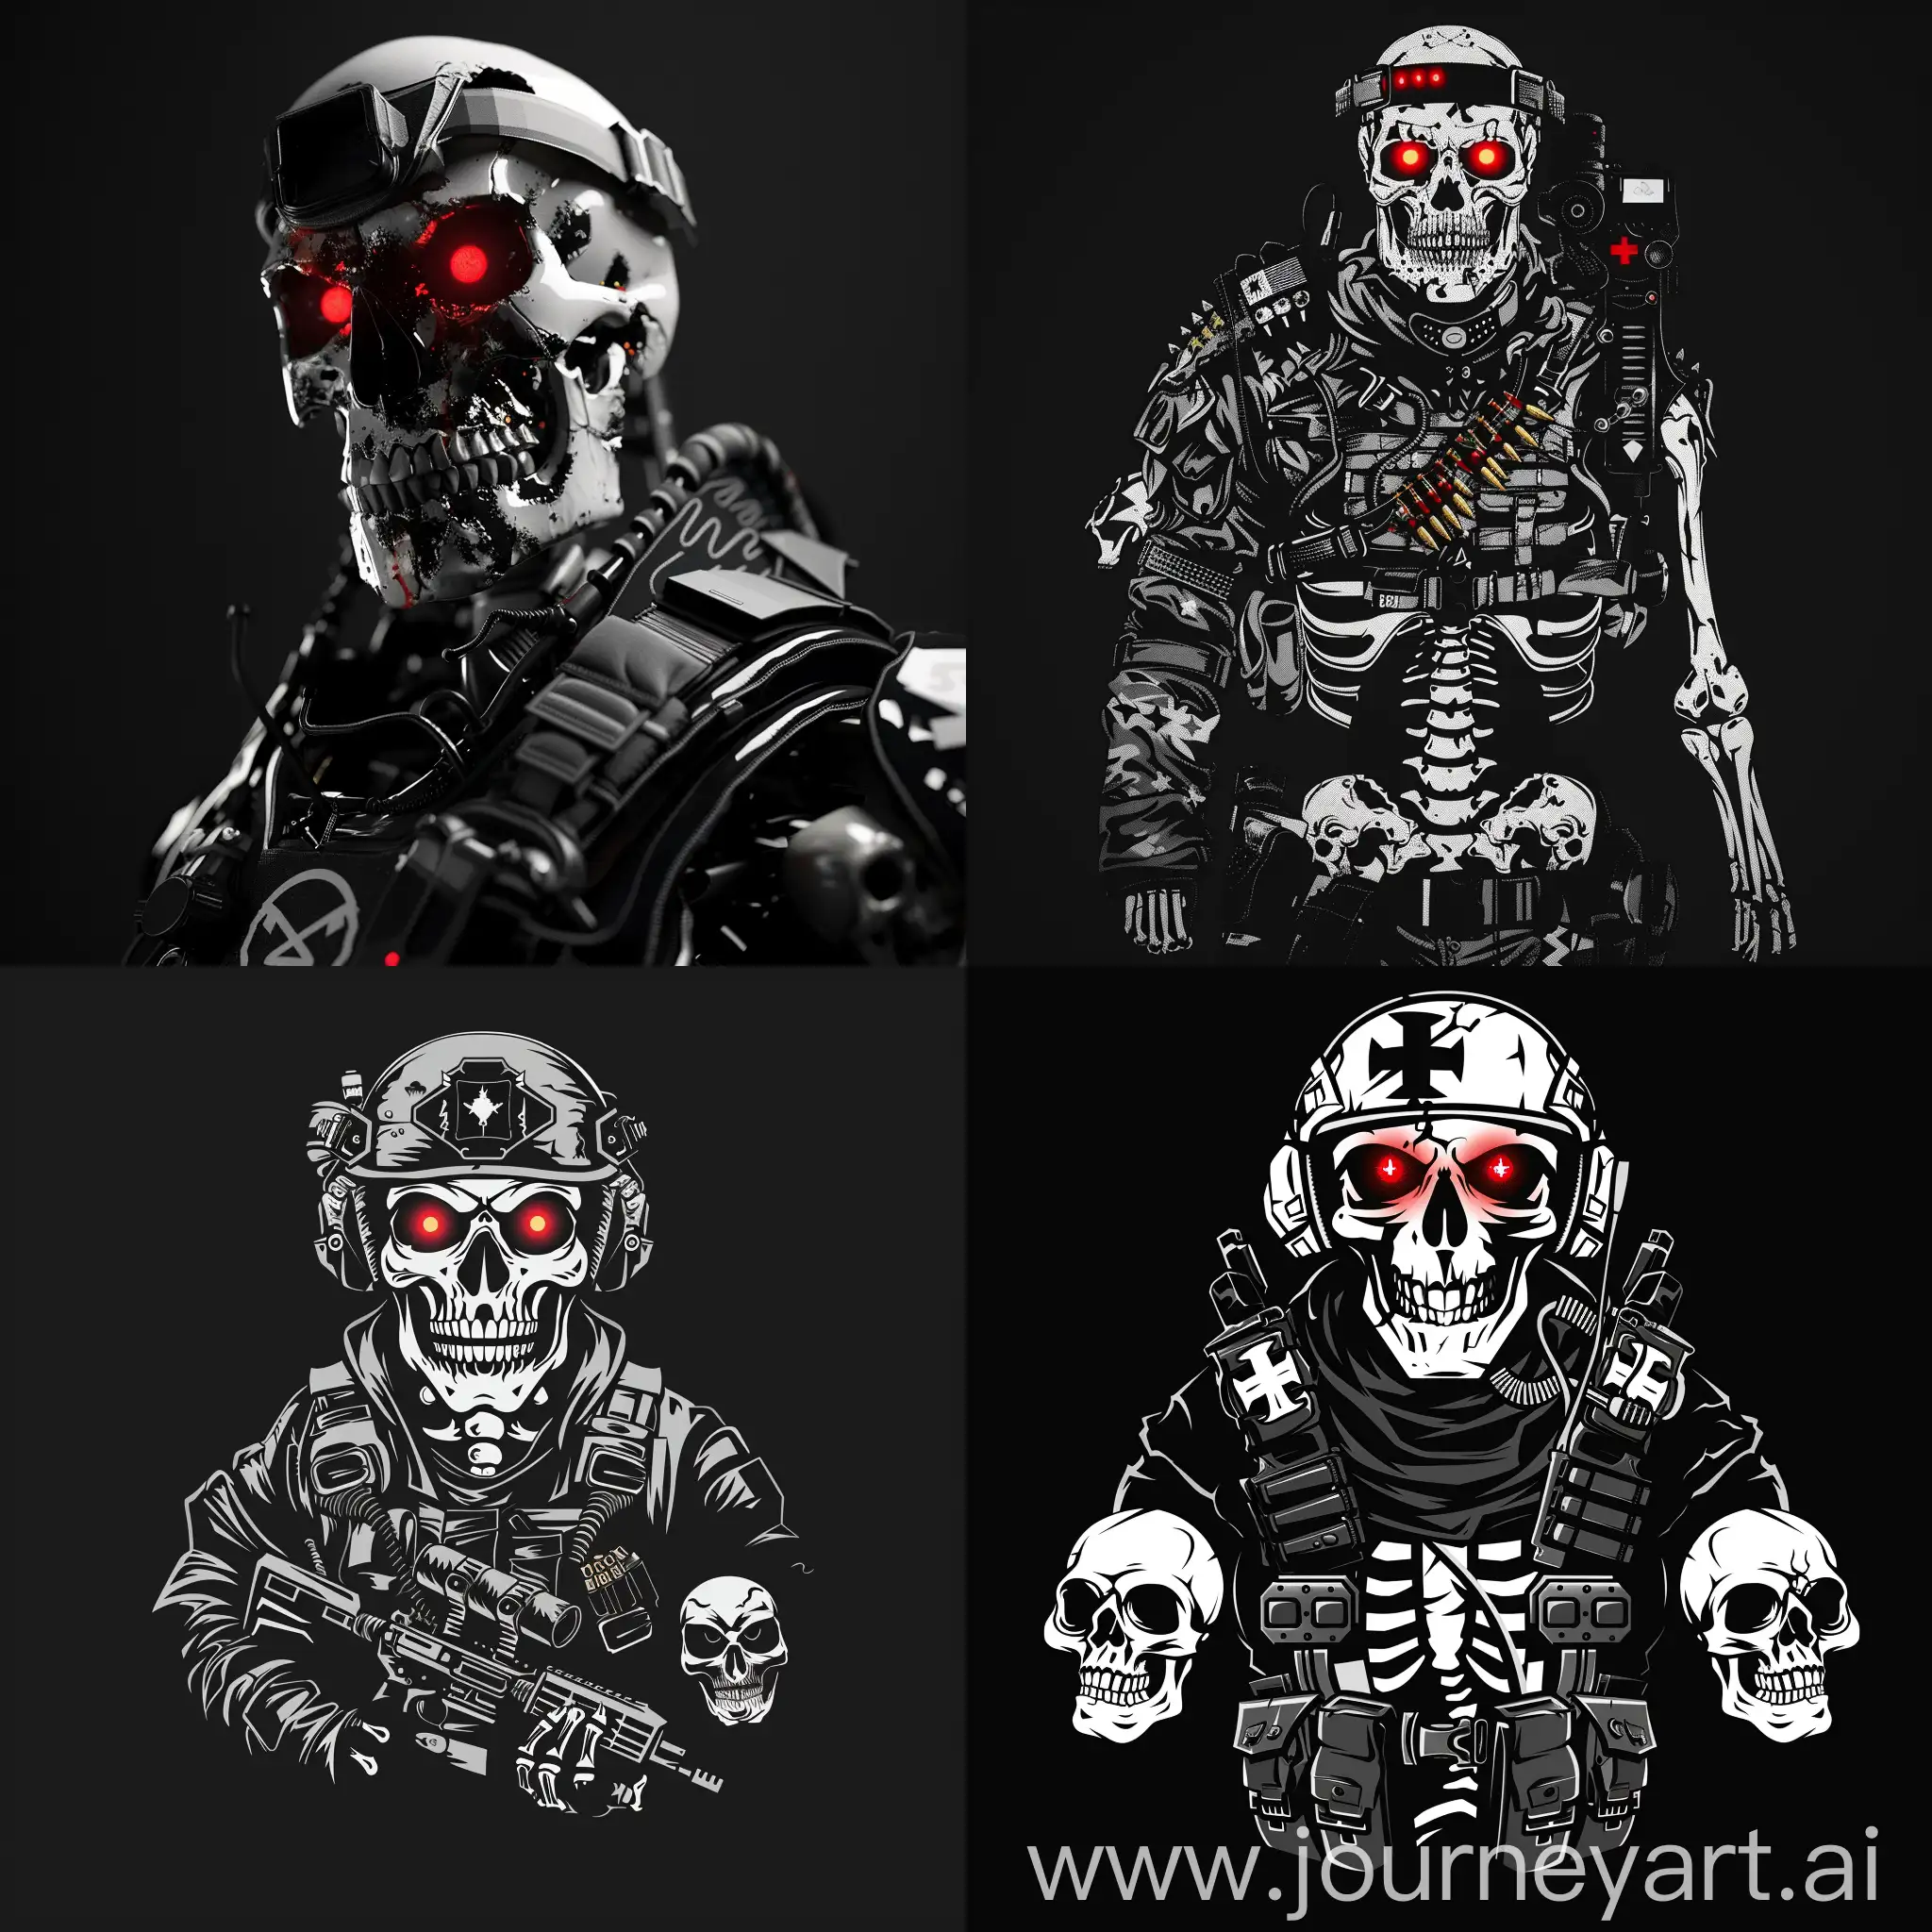 5 undead soldier look like a skeleton with modern military equipment, logo, glowing red eyes, skulls, black and white, black background